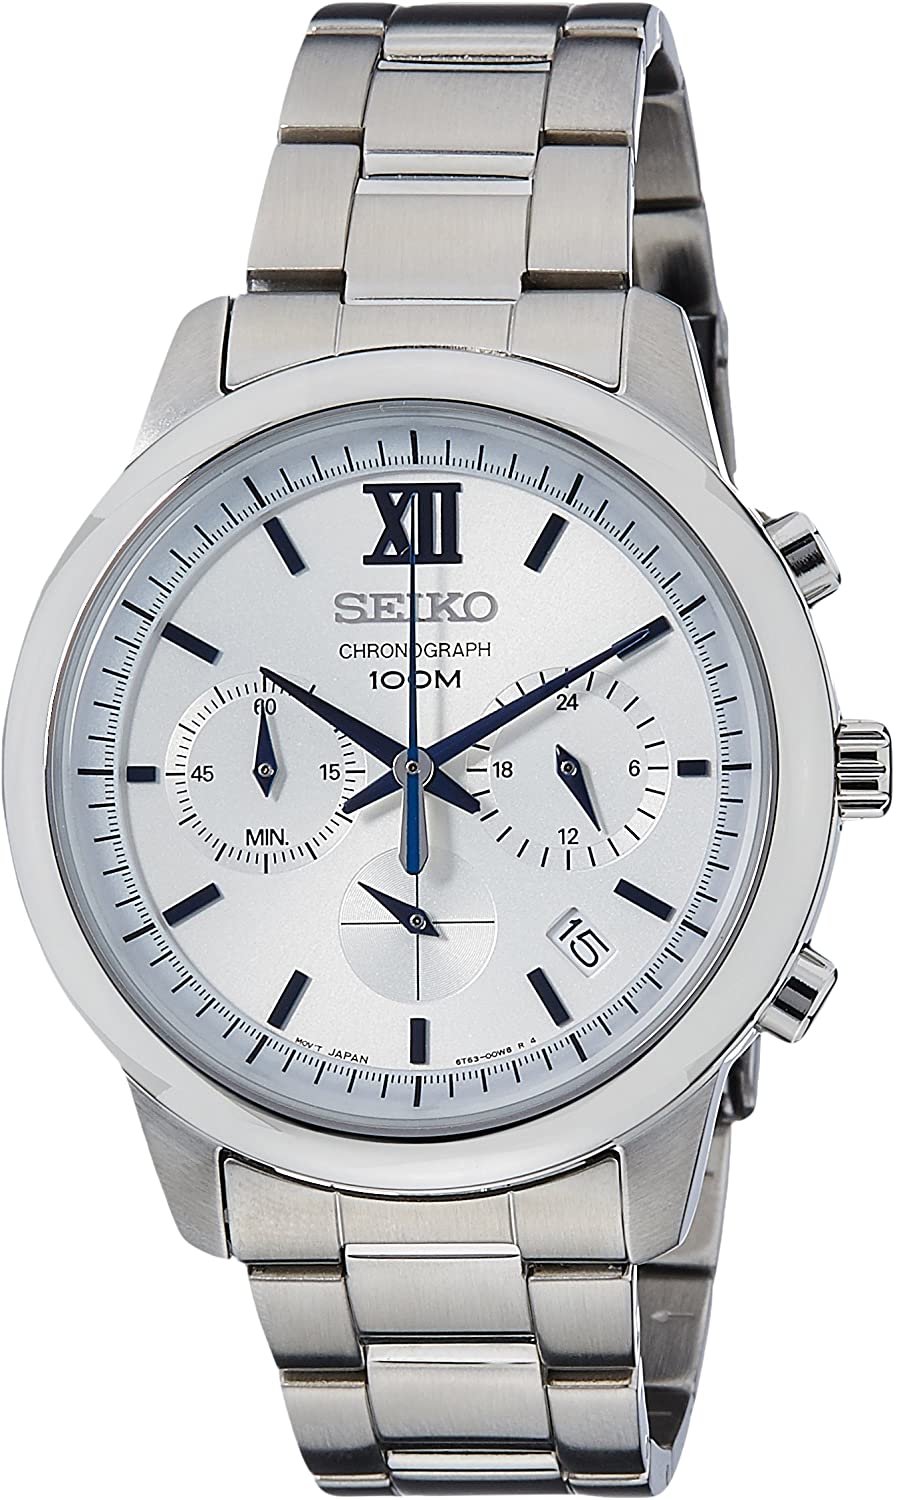 Seiko Chronograph Silver Dial Stainless Steel Mens Watch Model